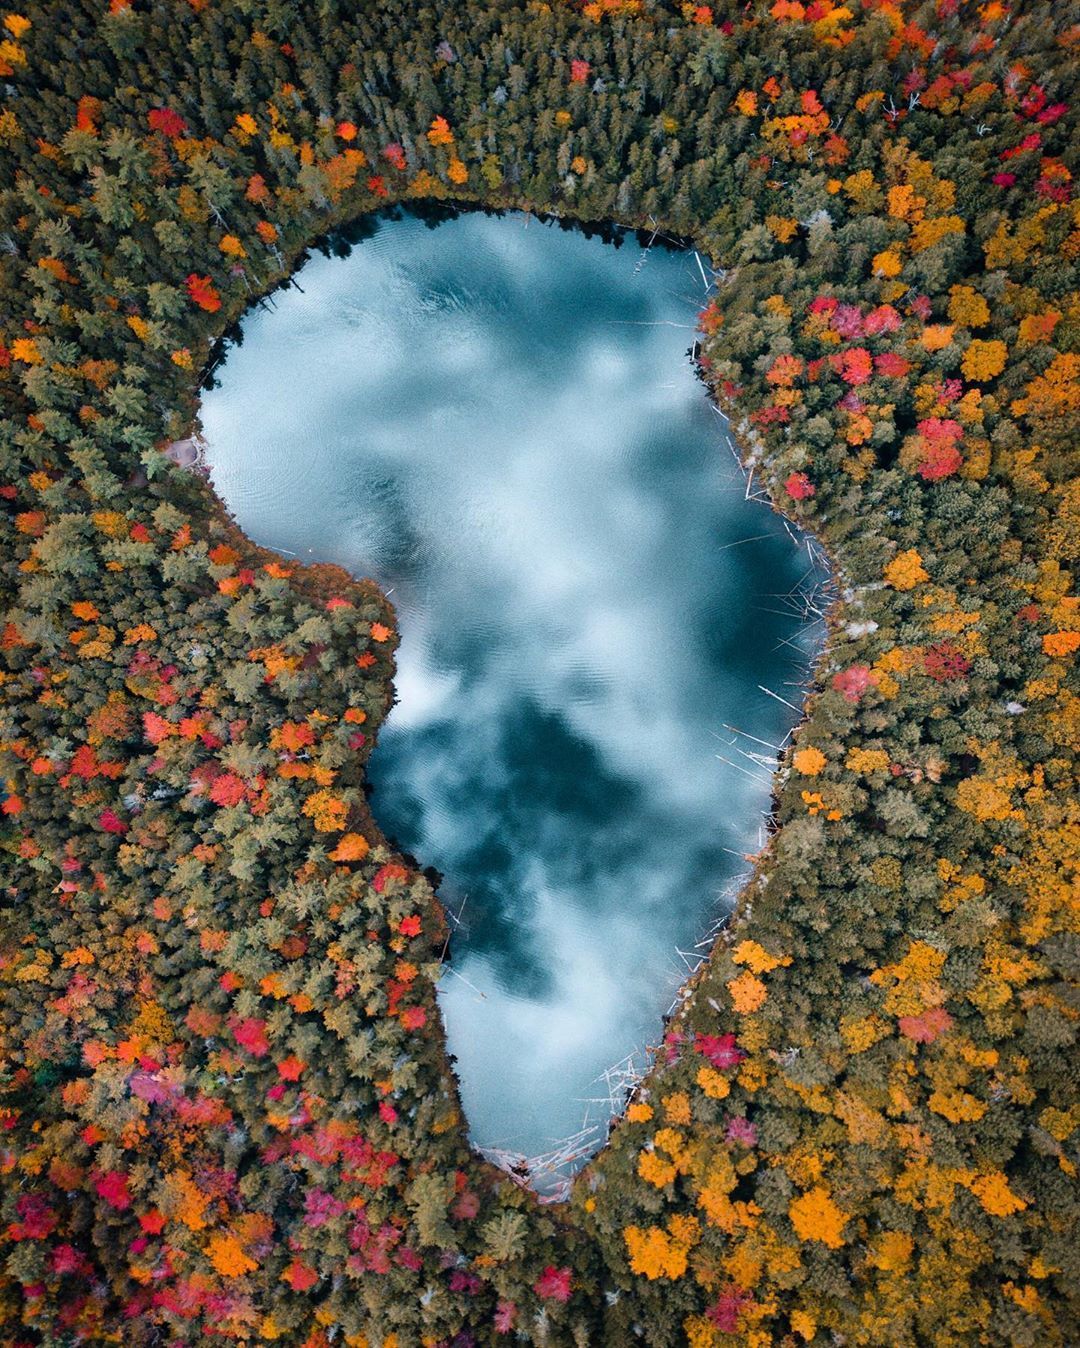 RYAN RESATKA on Instagram: “One of my favorite random ponds I’ve ever droned 😛 The sky reflection was quite nice. I flew my drone around until I spotted something…”